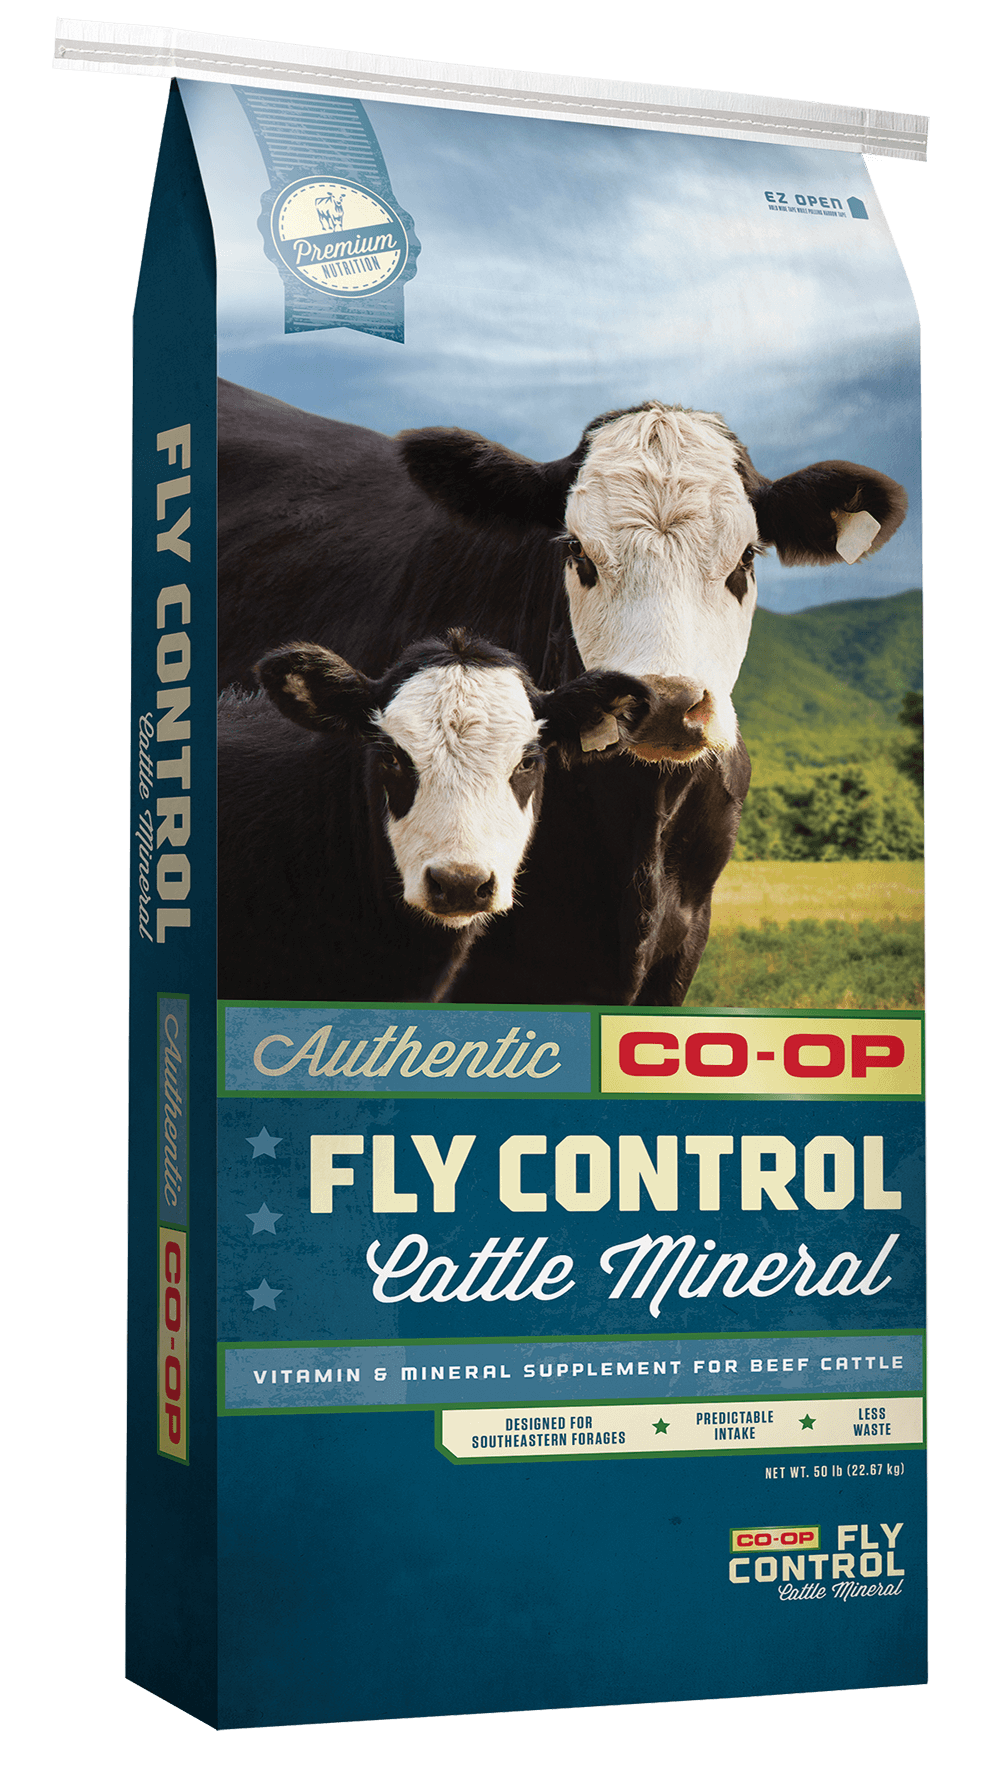 tfc-cattle-mineral-fly-control